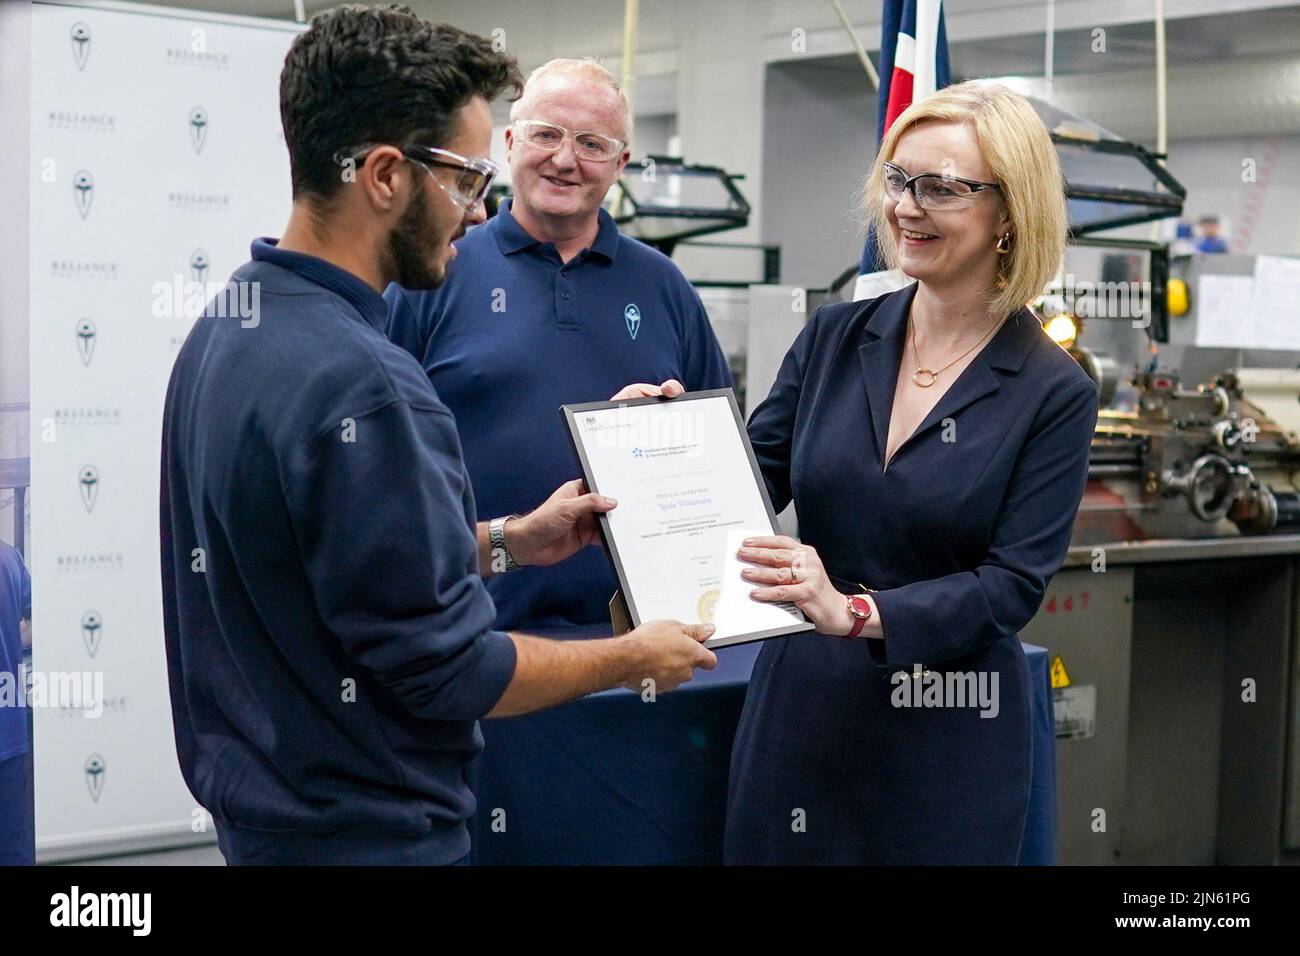 Britain's Conservative Party leadership candidate Liz Truss meets apprentices during a visit to the Reliance Precision engineering company ahead of a hustings event later, in Huddersfield, Britain August 9, 2022. Ian Forsyth/Pool via REUTERS Stock Photo